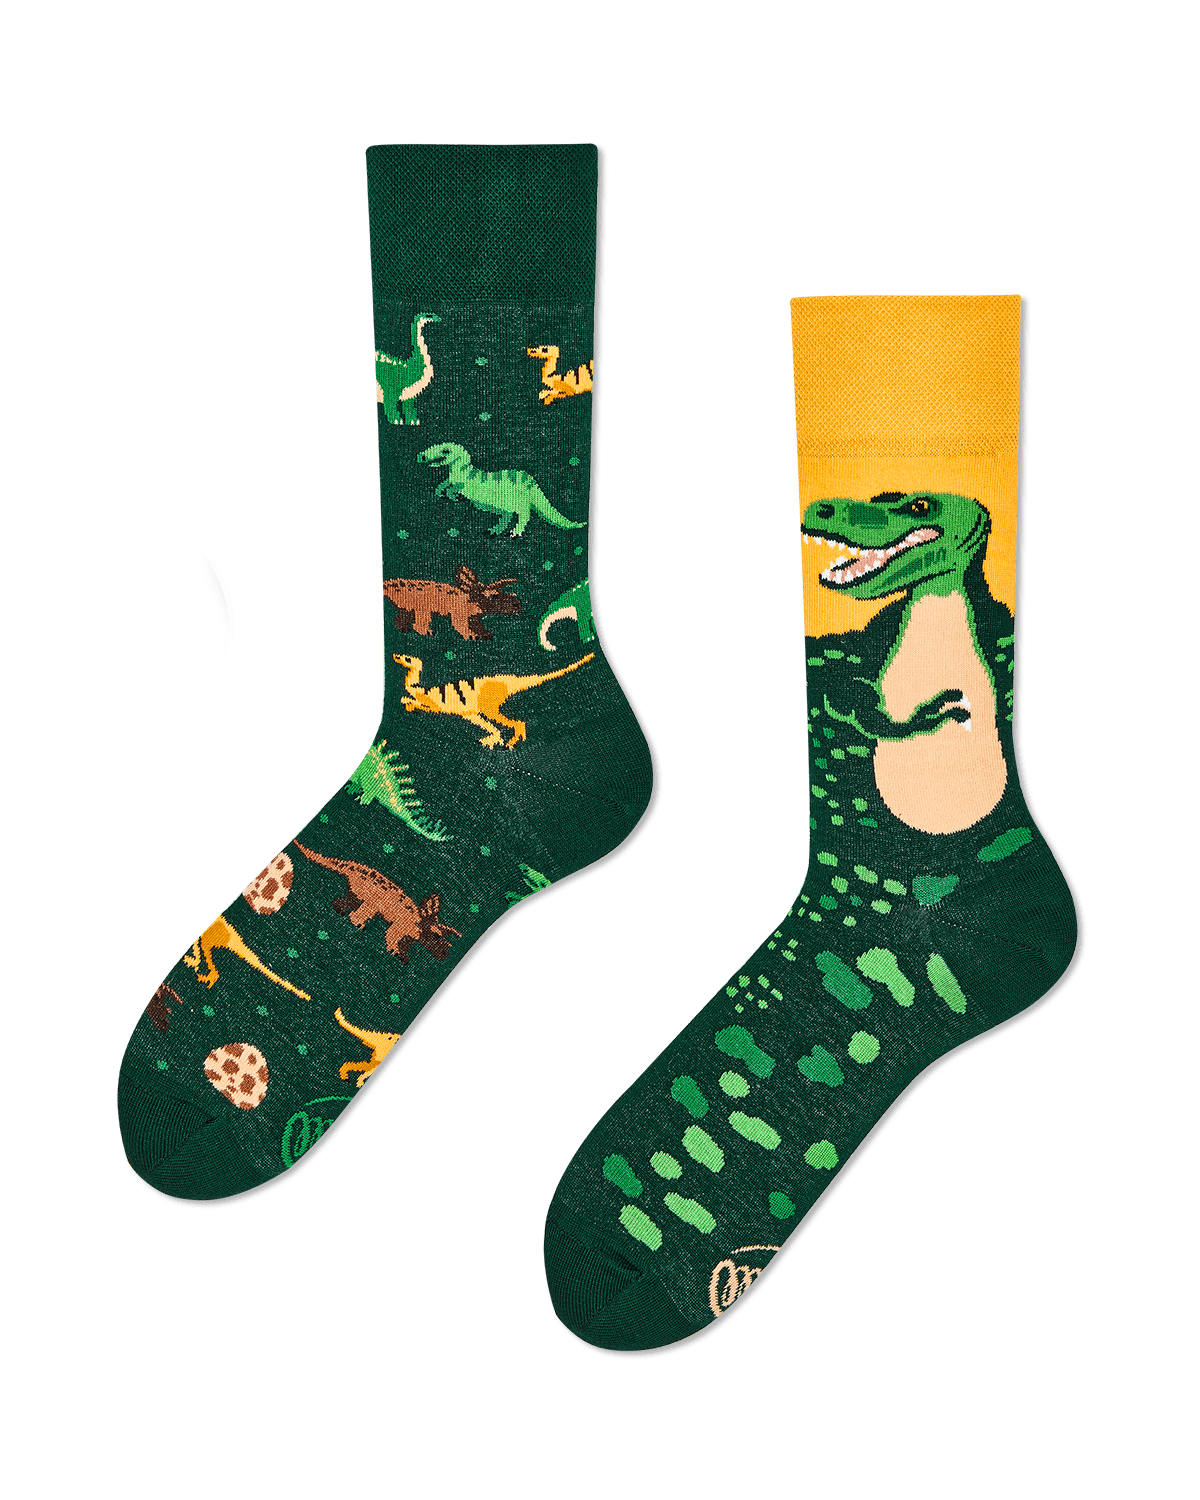 THE DINOSAURS - Chaussettes motif dinosaures